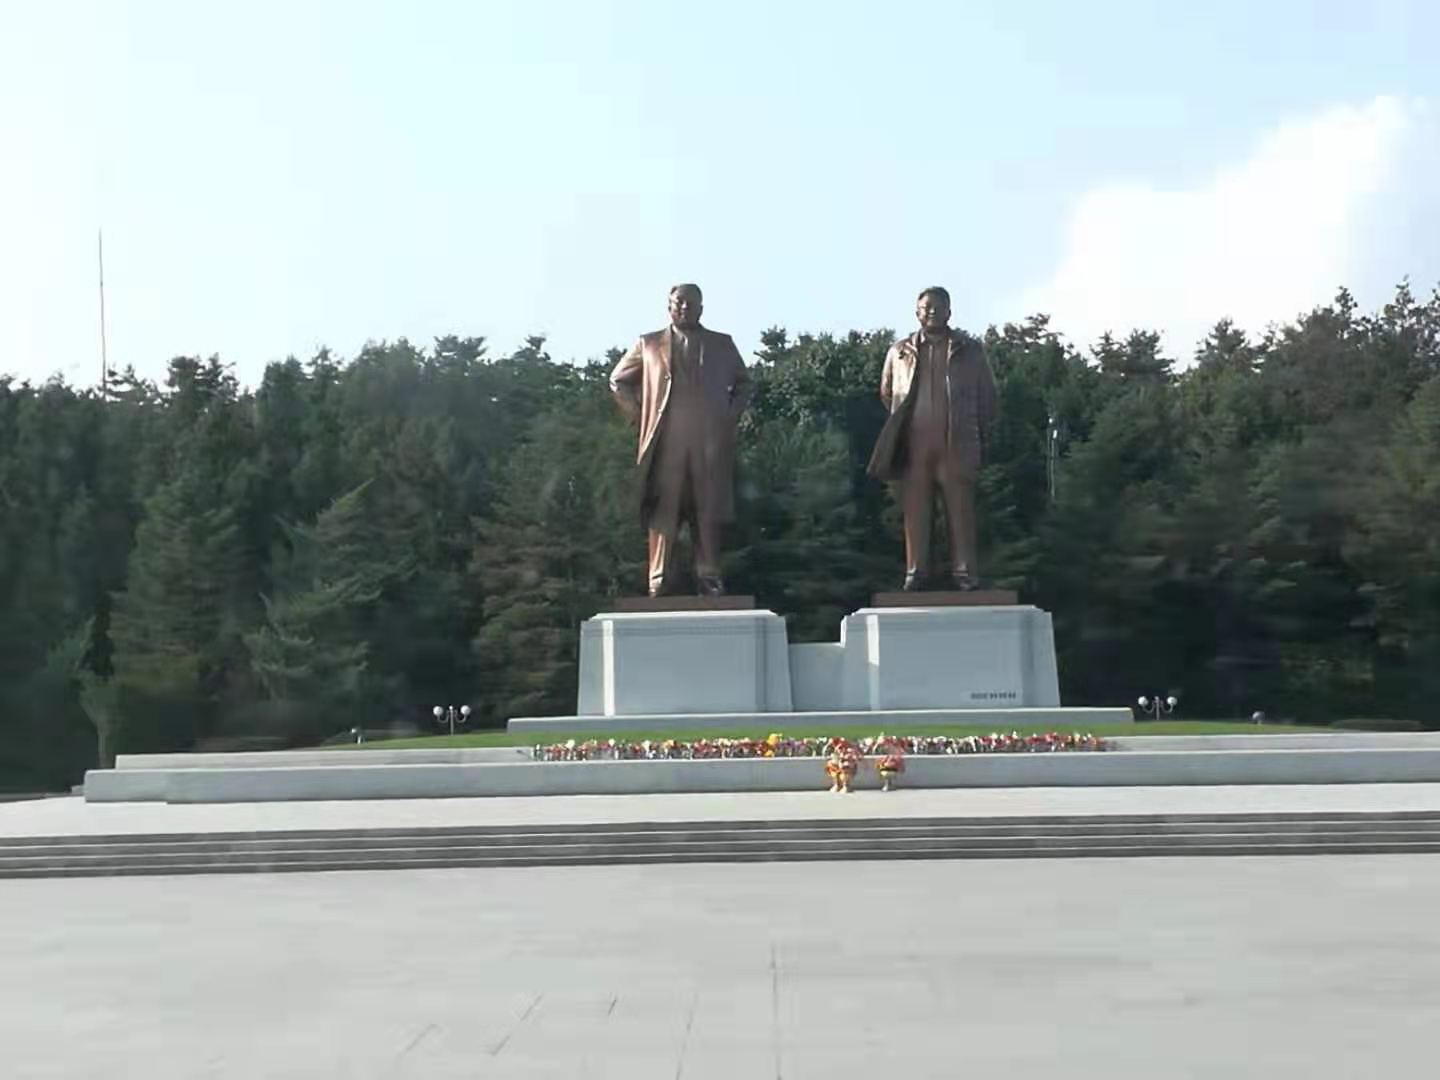 Statues of the leaders sighted during our Pyongyang Korean Language Study Tour